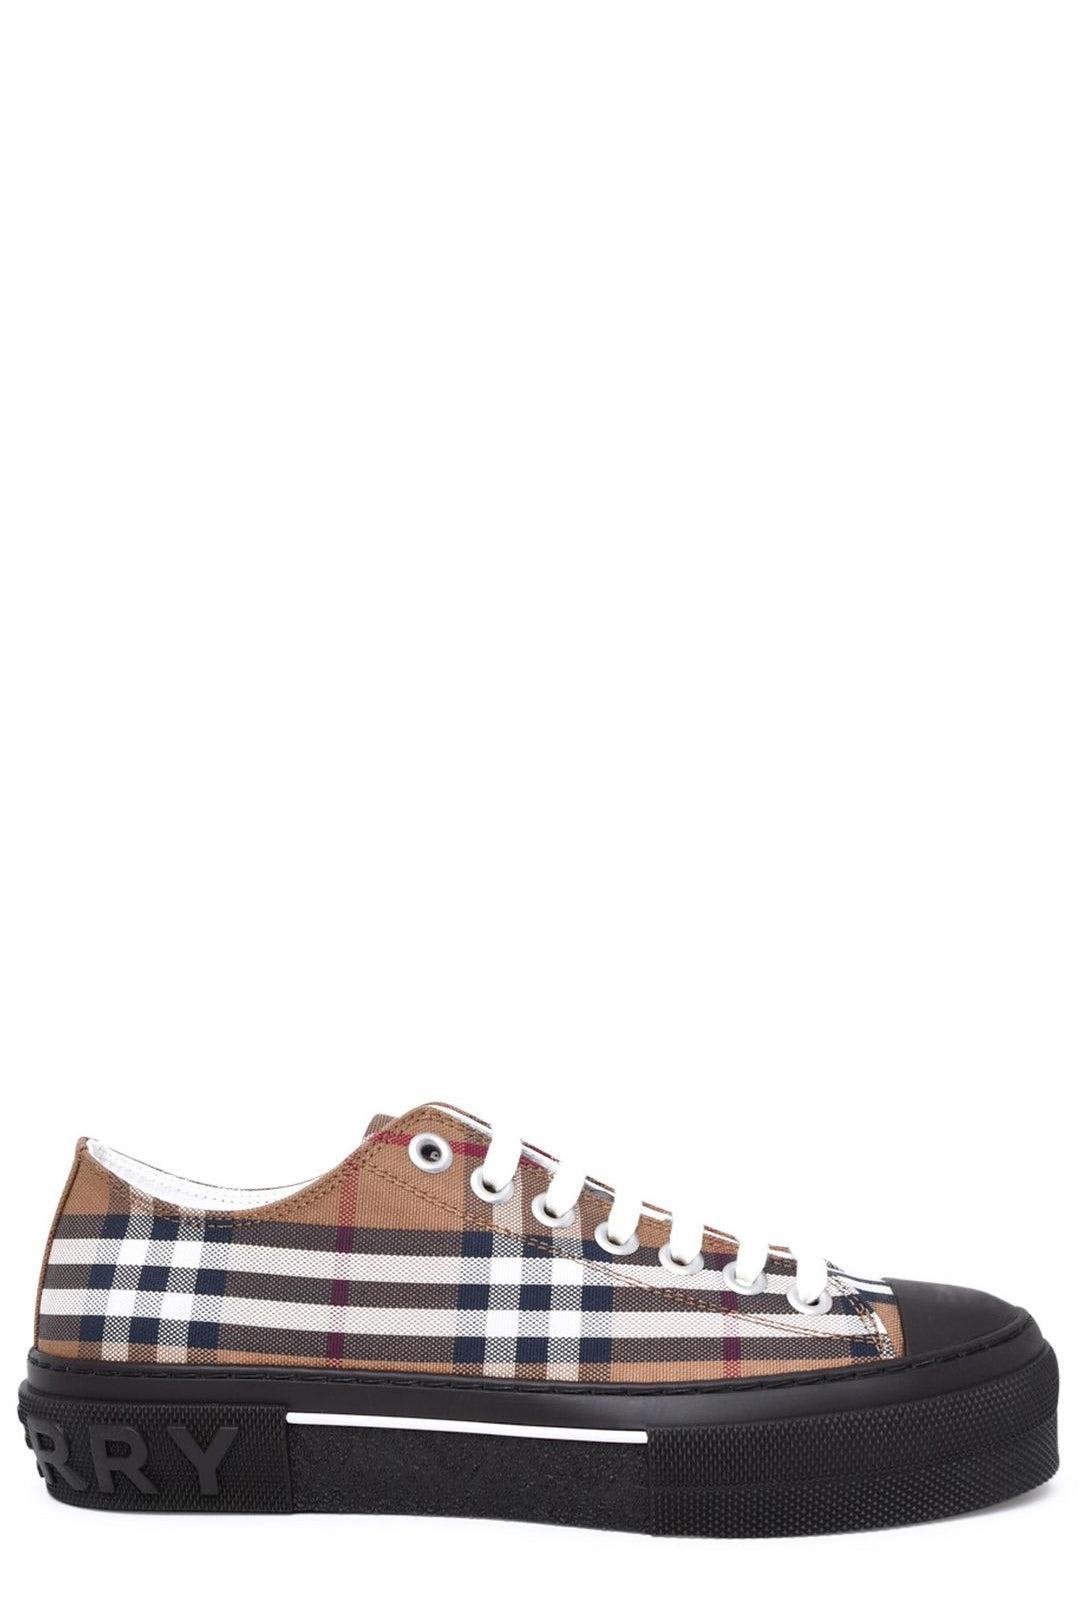 Burberry Vintage Check Pattern Lace Up Sneakers